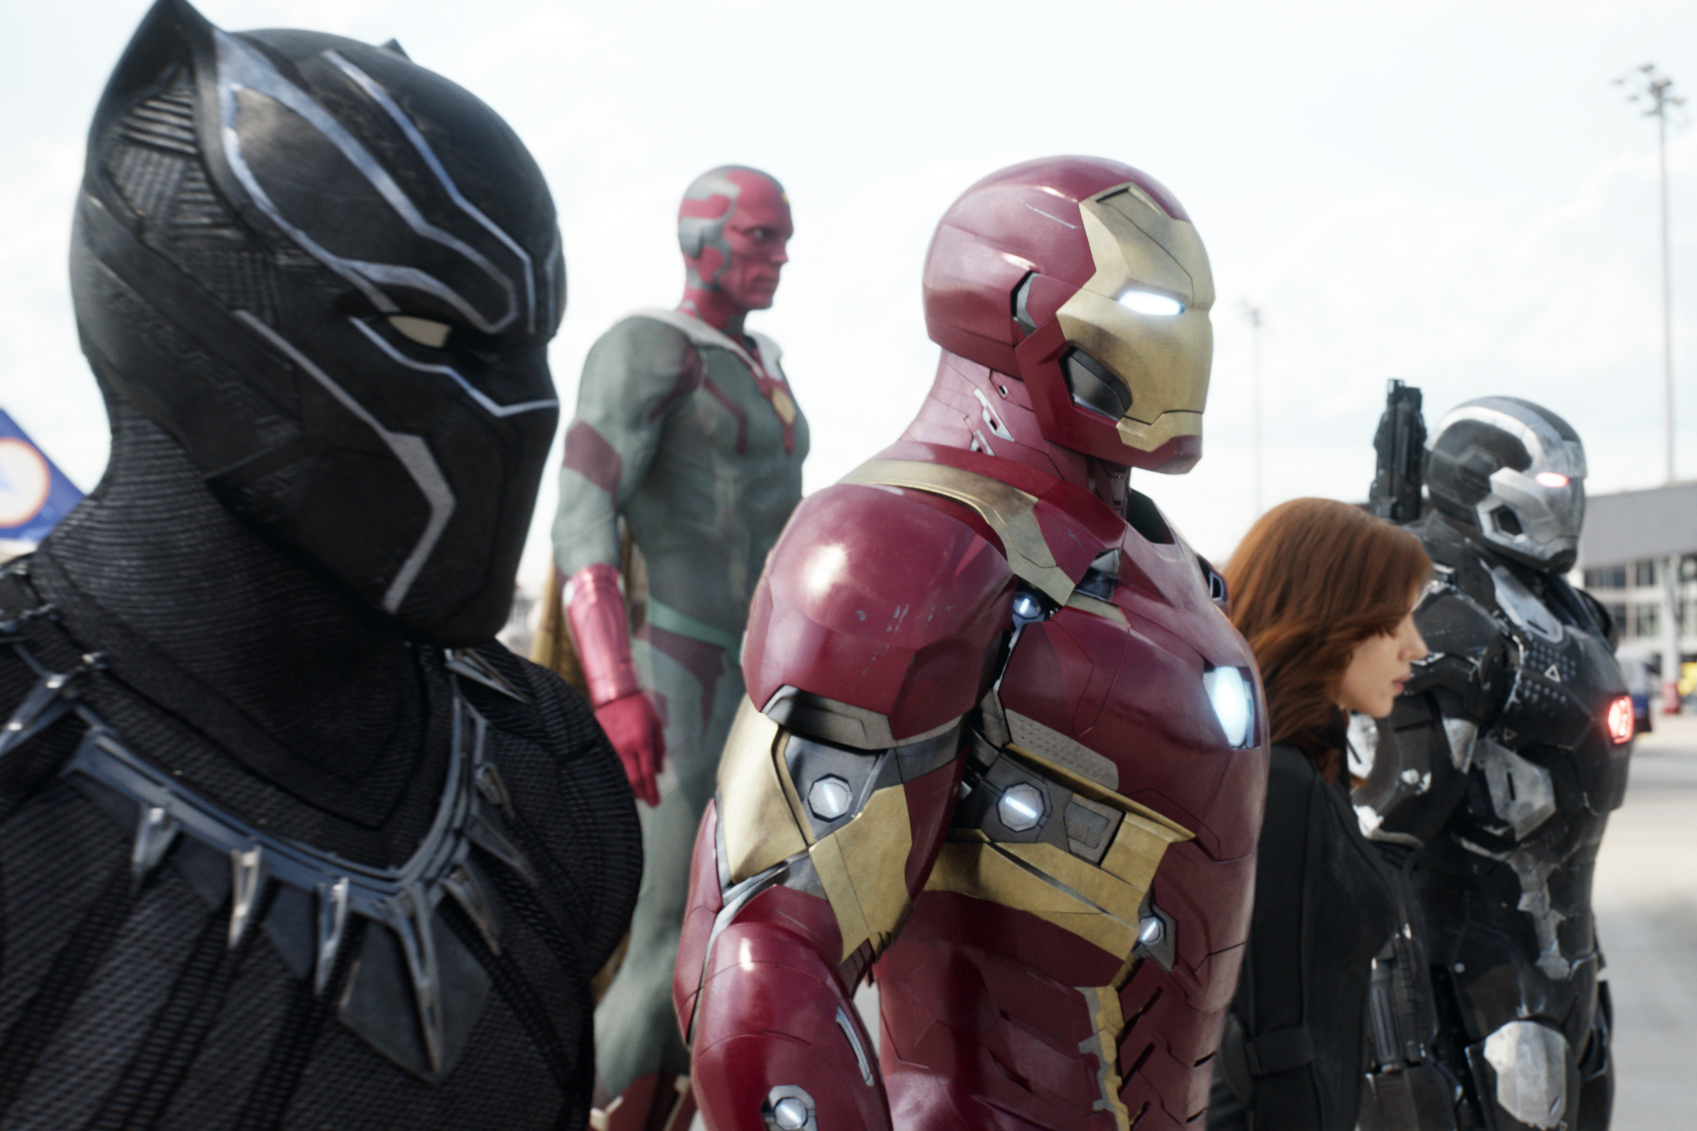 Black Panther joins team Iron Man as they face off against Team Cap